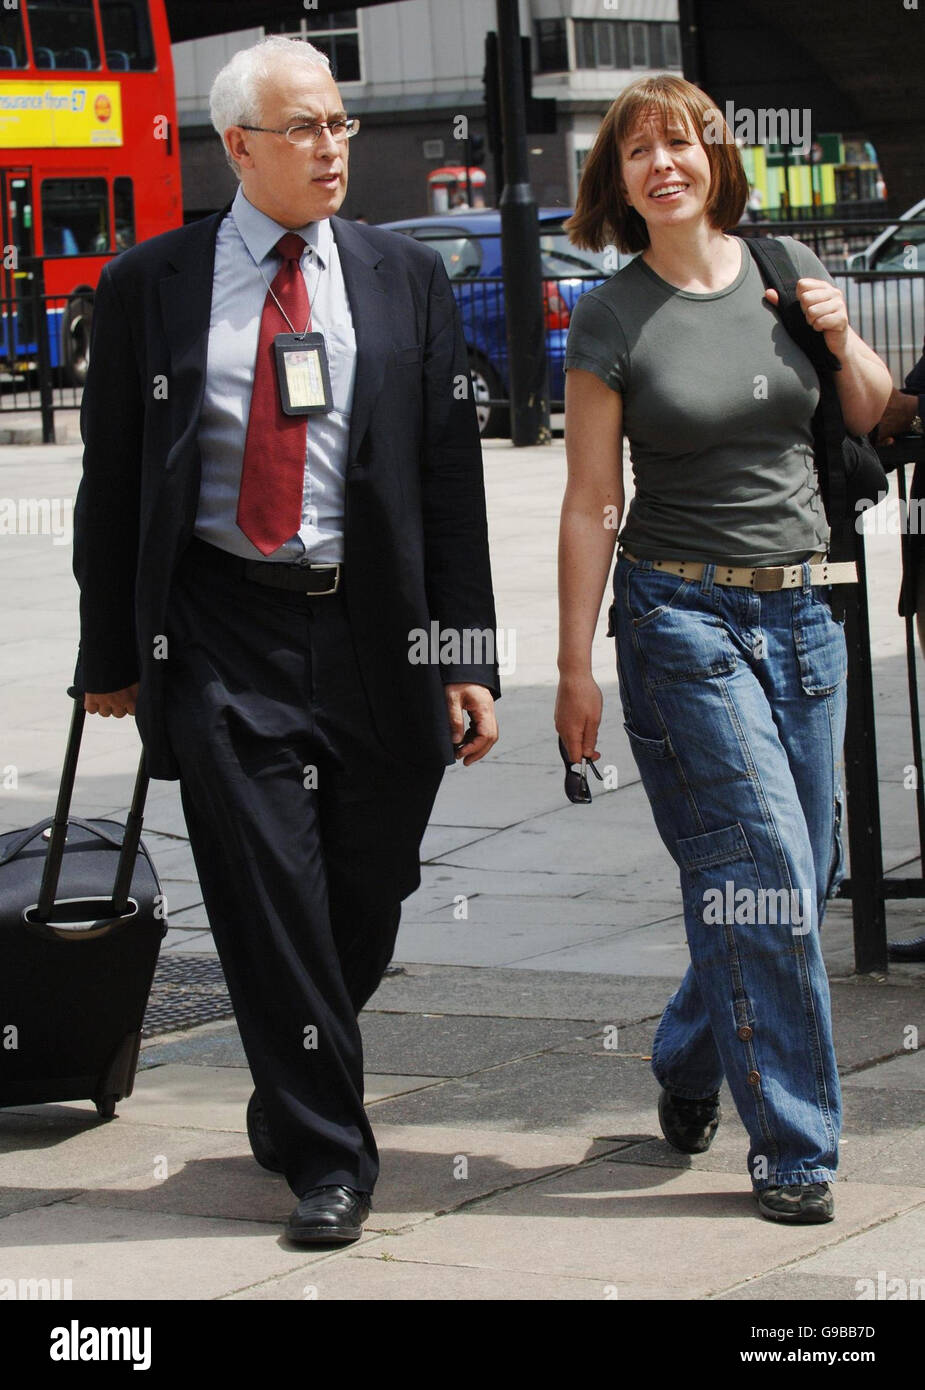 Julian Young and Kate Roxburgh respective solicitors for east London terrorist suspect brothers Abul Koyair Kalam and Abdul Kahar Kalam, outside Paddington Green police station, London, where police are interviewing them. Stock Photo